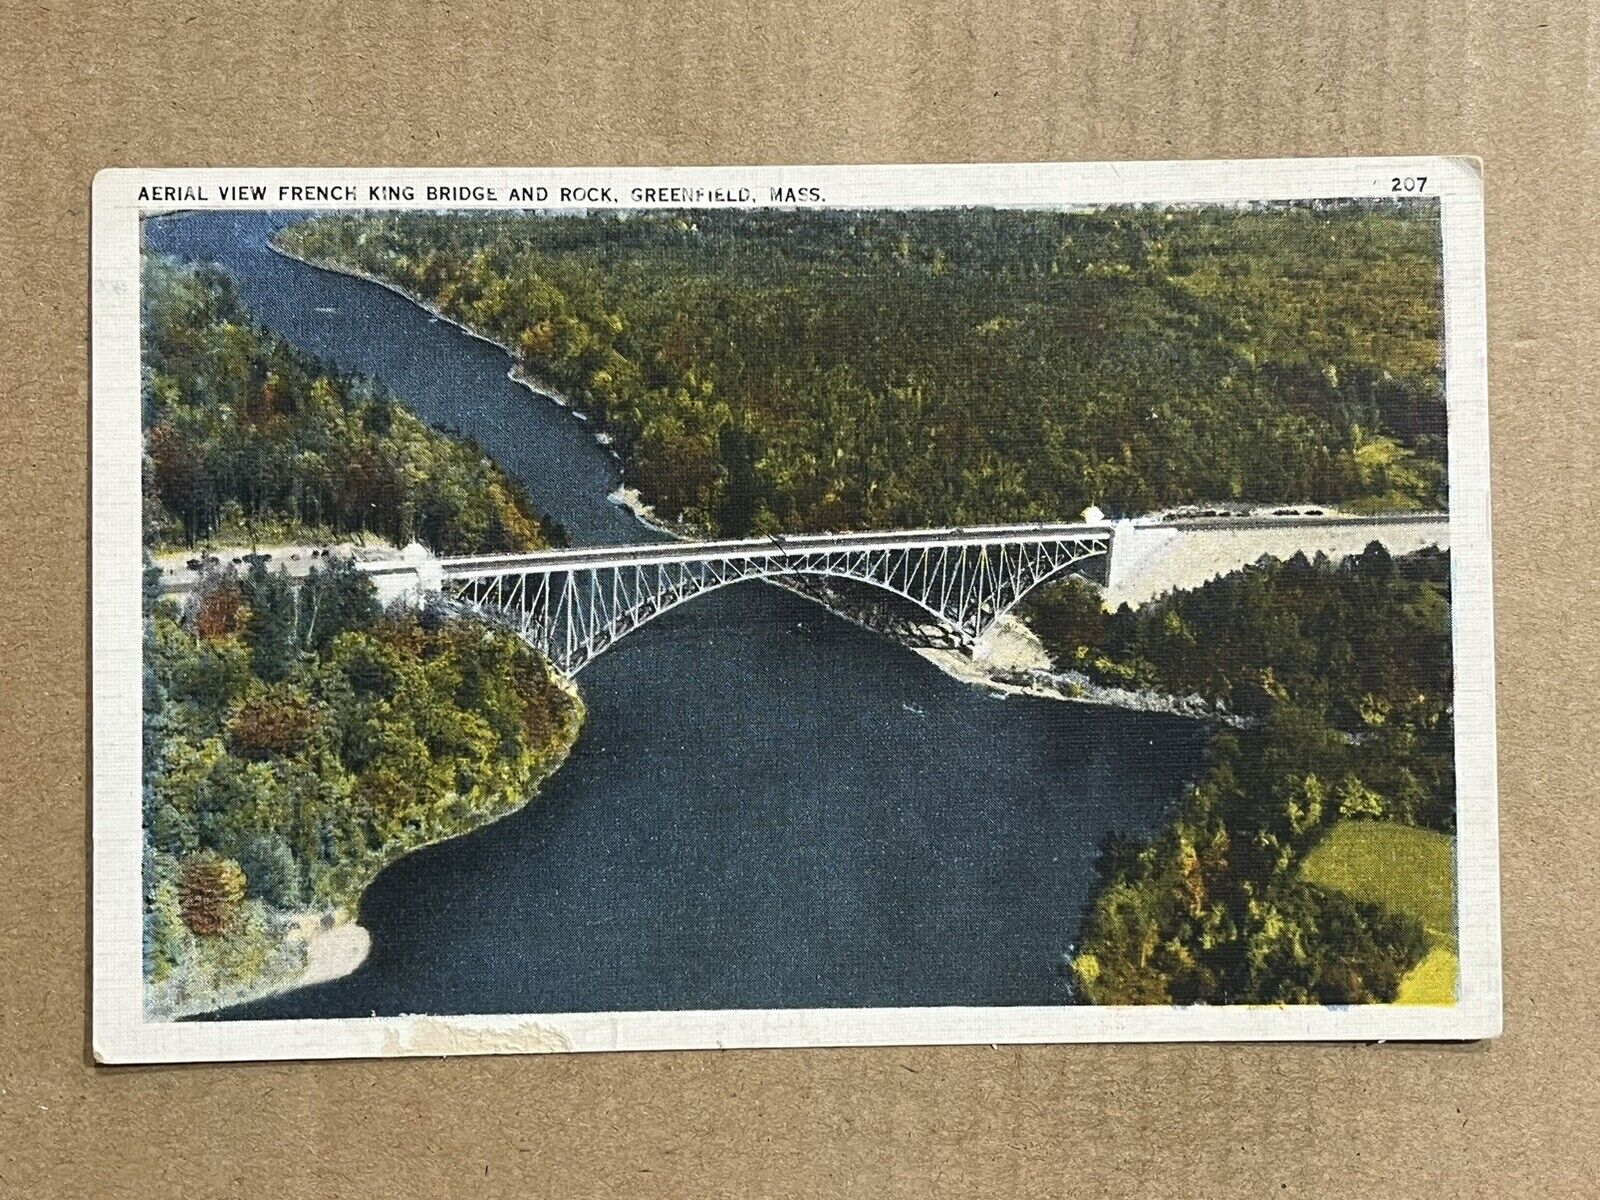 Postcard Greenfield MA Massachusetts French King Bridge and Rock Aerial View PC